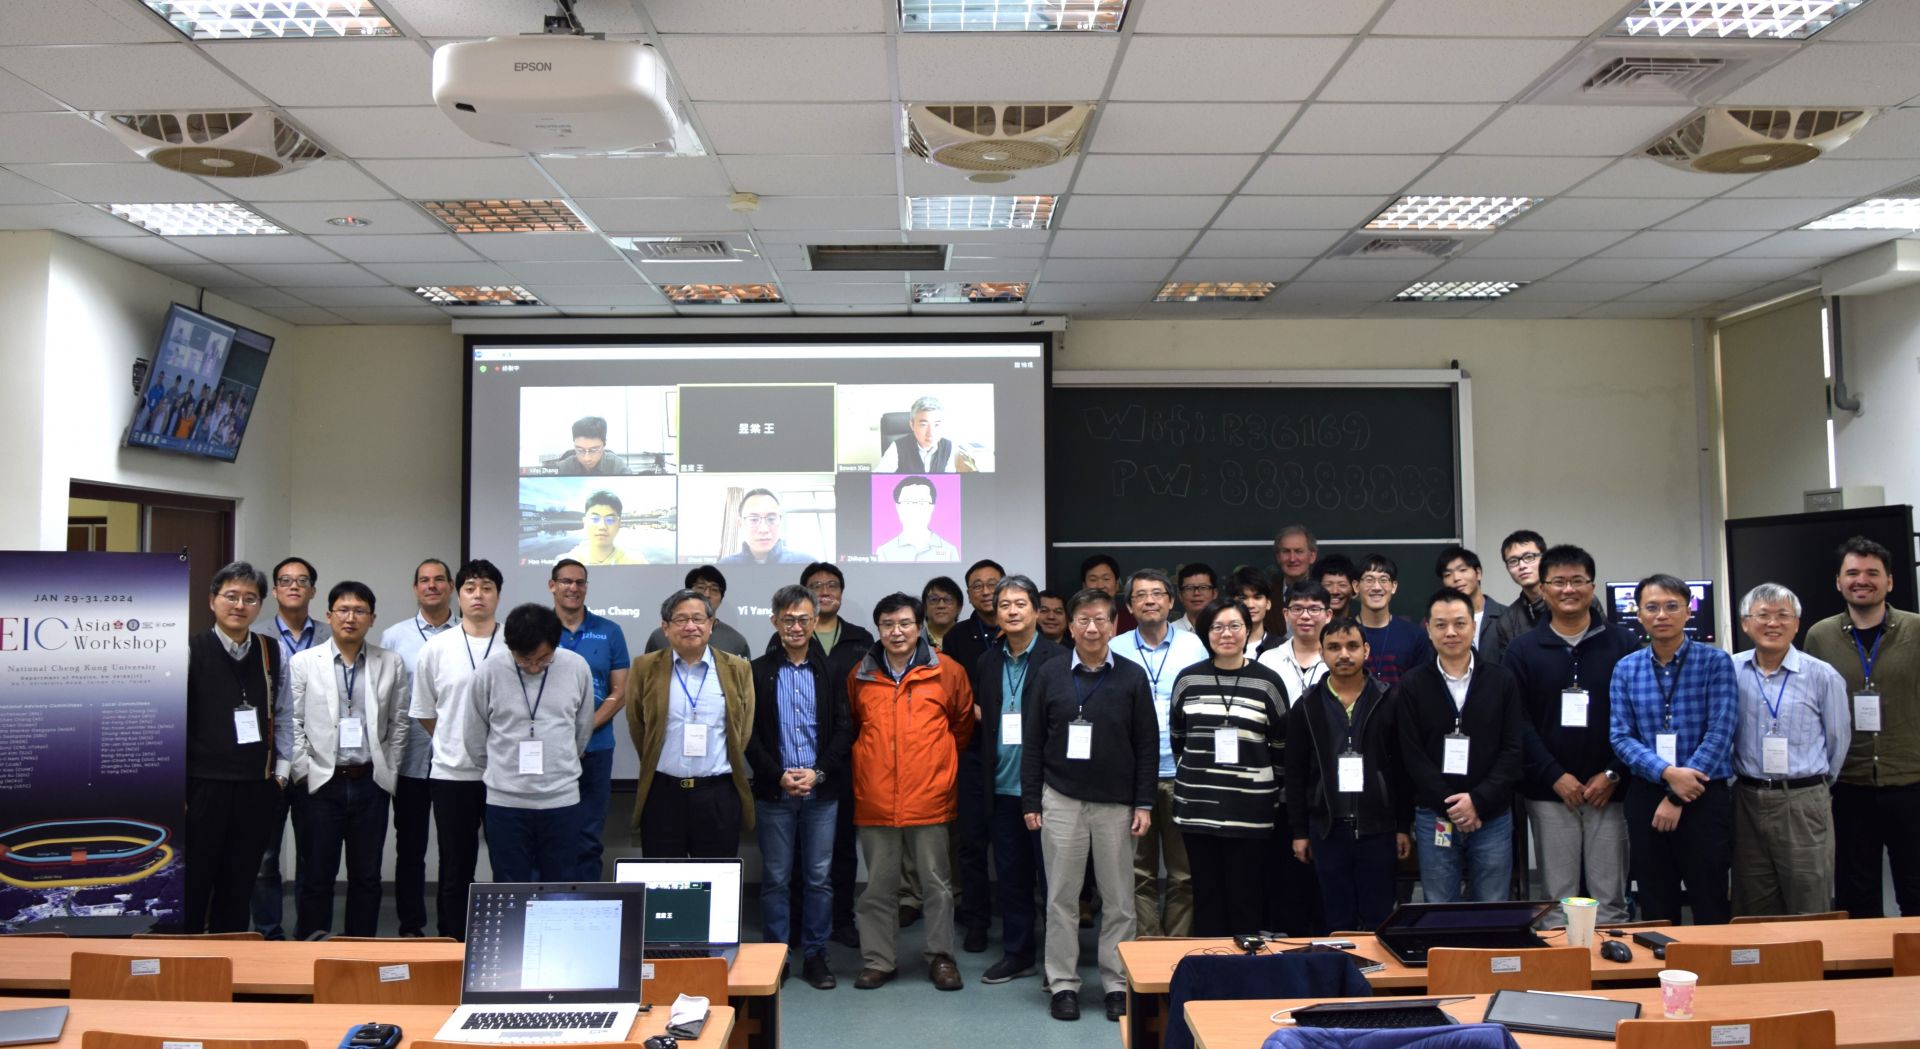 Unlocking Subatomic Mysteries: Asian Scientists Gather at NCKU to Discuss Next-Gen High-Energy Nuclear Physics